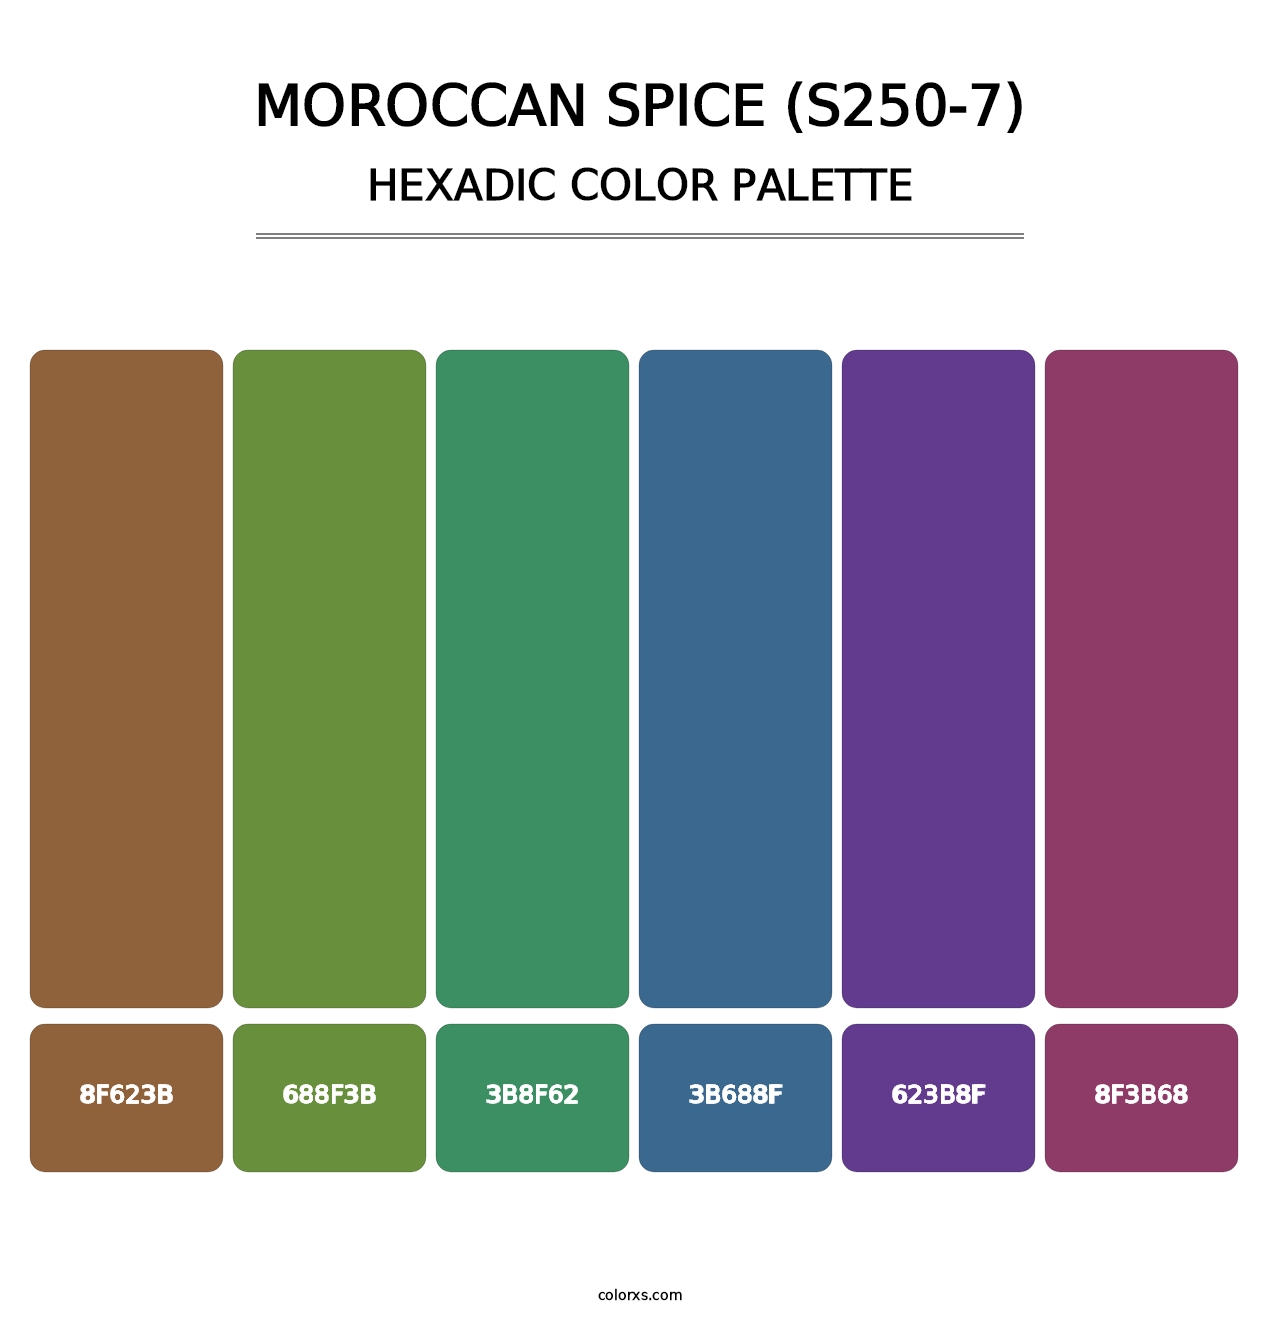 Moroccan Spice (S250-7) - Hexadic Color Palette